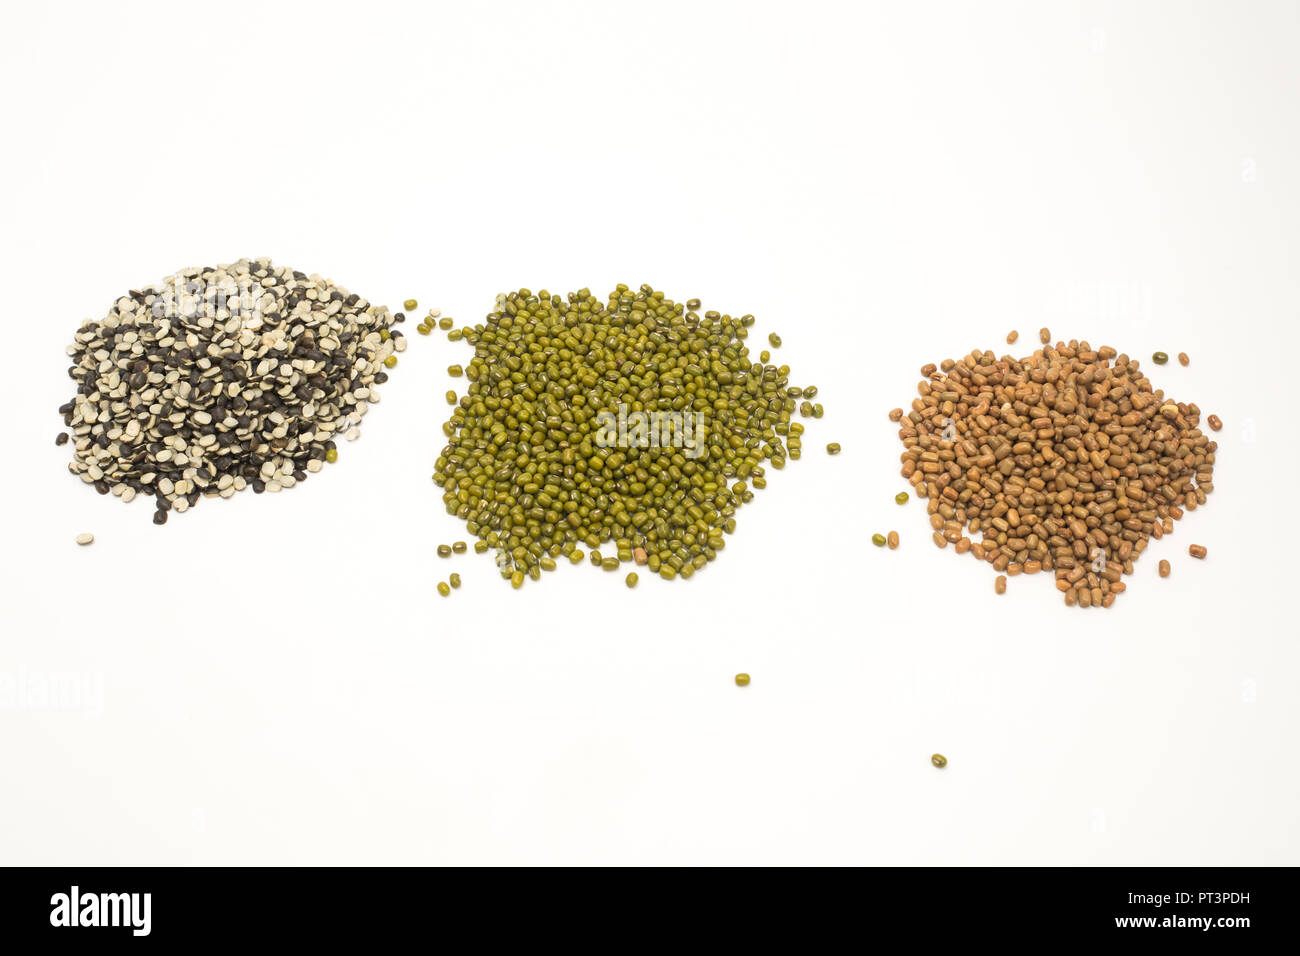 Collection of various seeds split black lentil, green mung beans, pigeon pea. Isolated on white background. Stock Photo